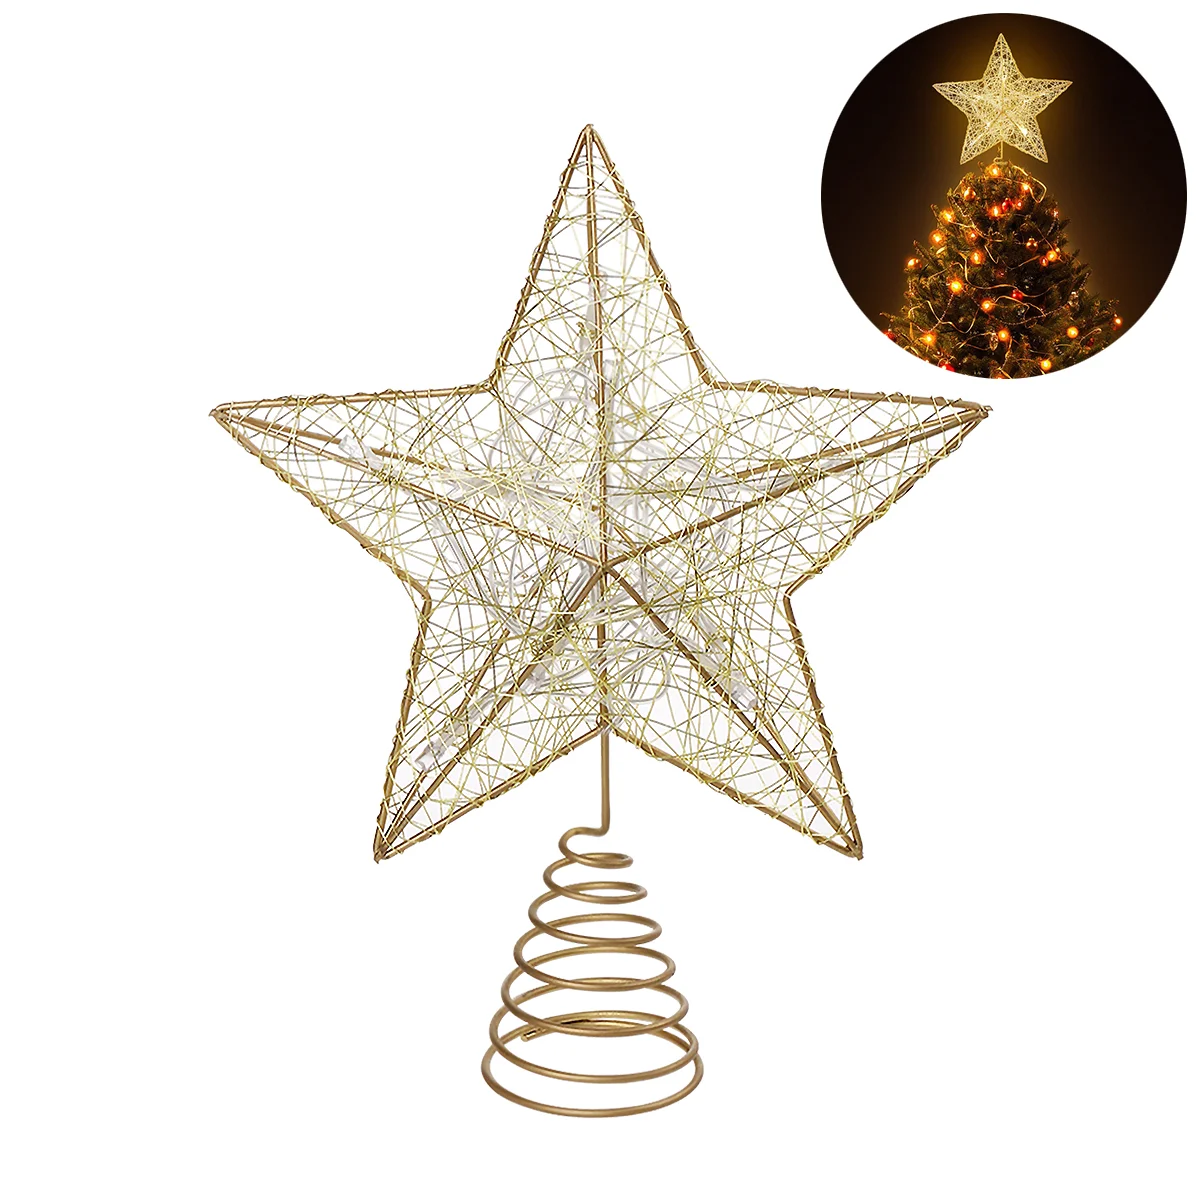 

Tree Topper Star Christmas Decor Holiday Twig Fairy Decorations Xmas Sparkling Glitter Home Treetop Festival Metal Lights